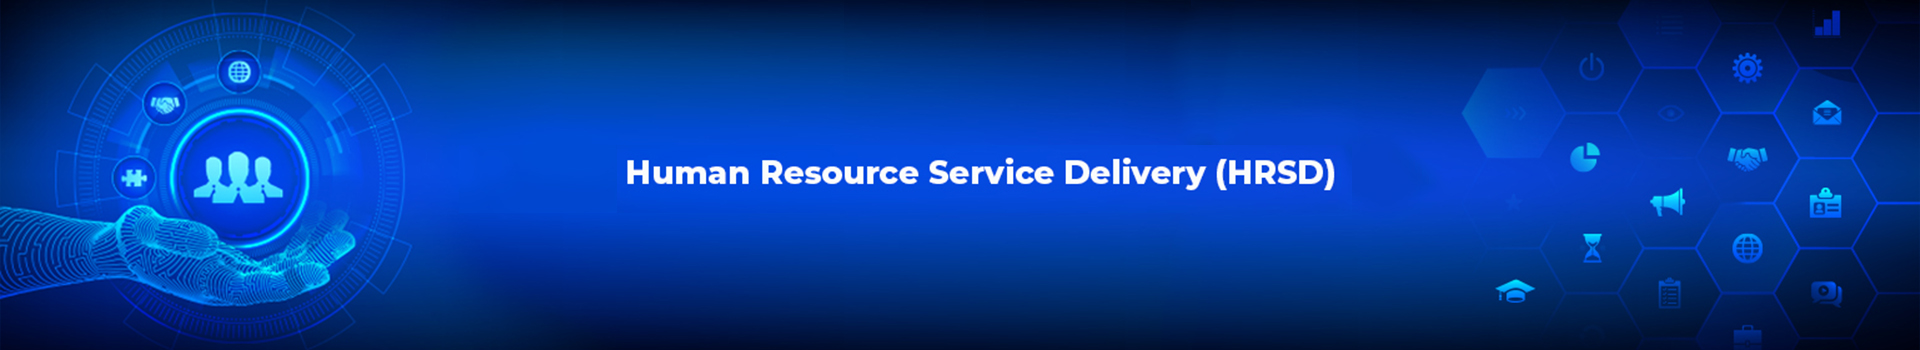 Human Resource Service Delivery